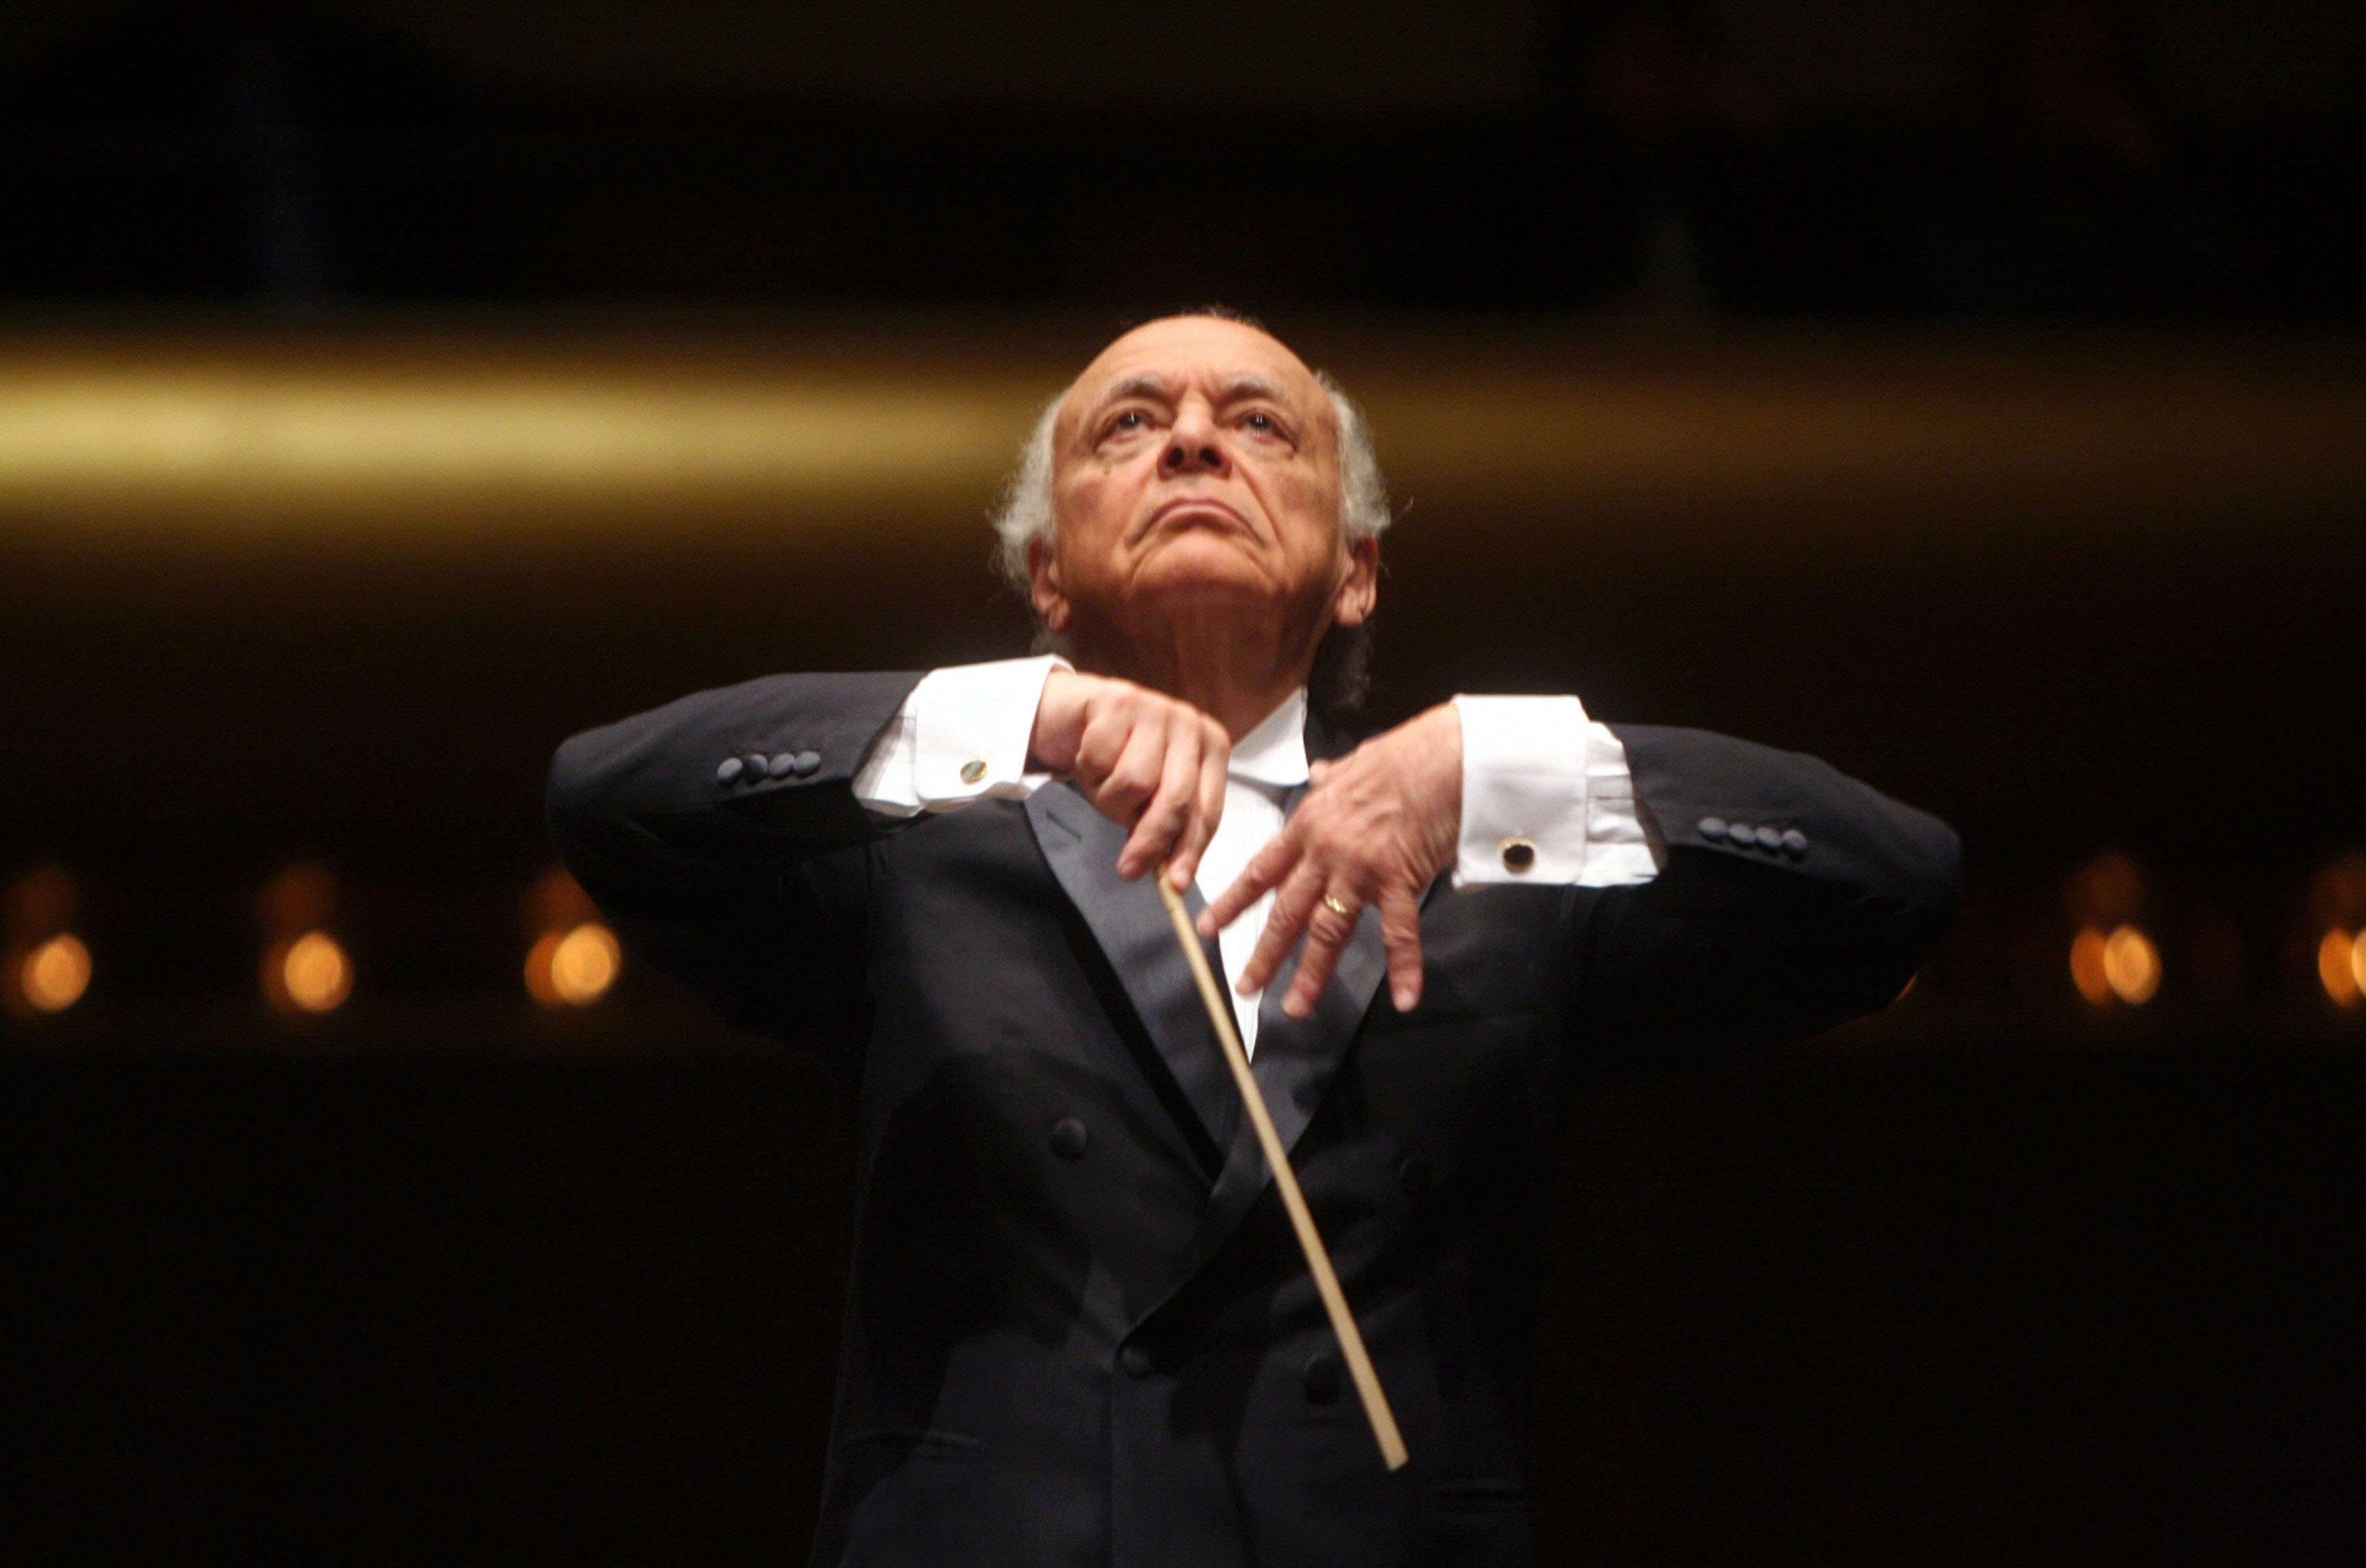 Lorin Maazel conducts New York Philharmonic in Brahms's "Symphony No.4" at Avery Fisher Hall on Jan. 30, 2008. (Hiroyuki Ito—Getty Images)